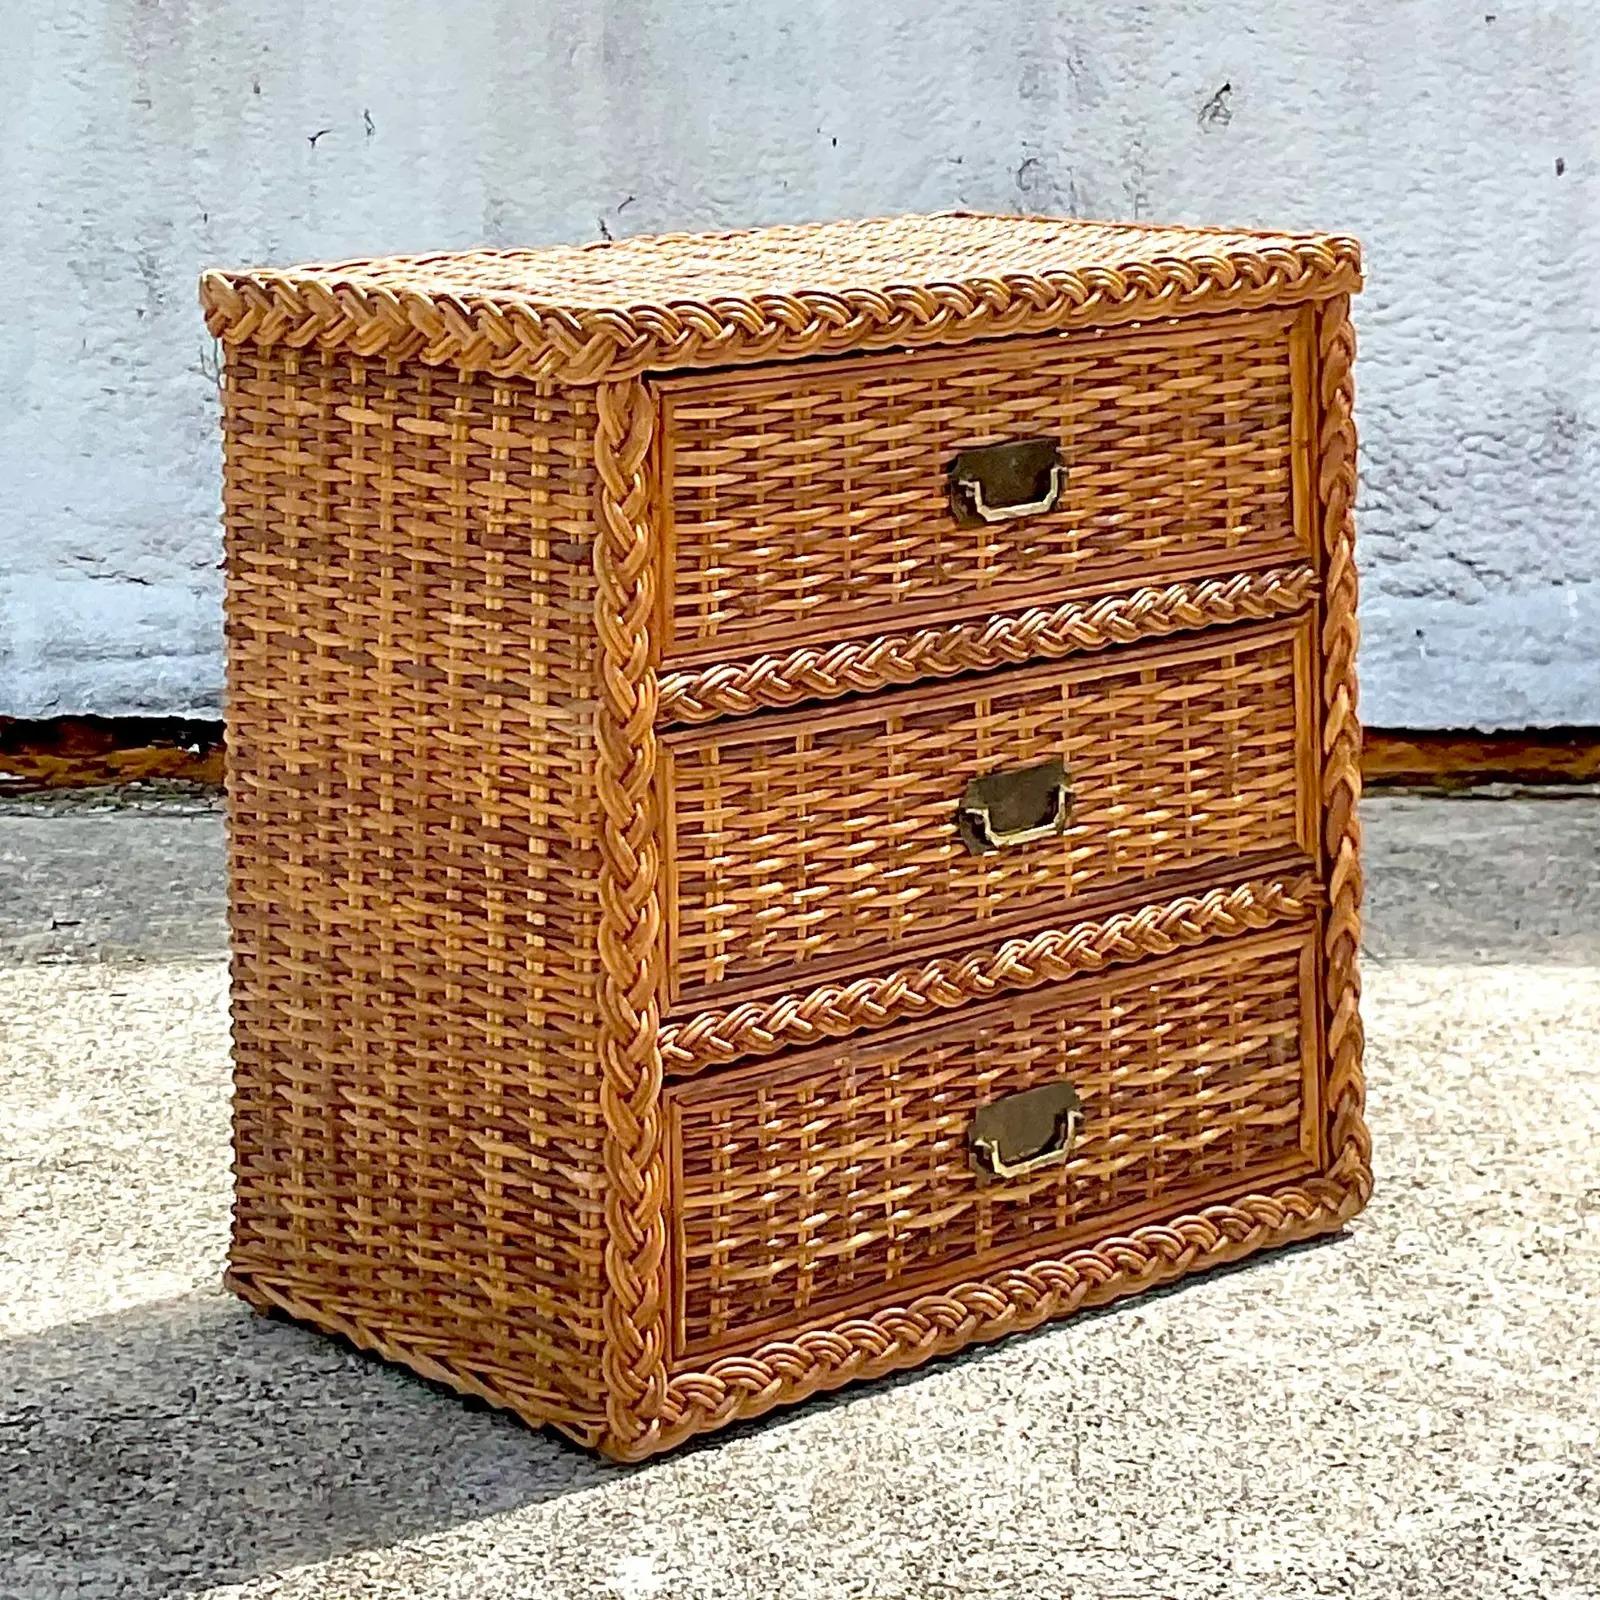 A fabulous vintage Coastal chest of drawers. Beautiful thicker rattan in a beautiful honey brown color. Chic braided trim along the edge. Brass campaign hardware. Acquired from a Palm Beach estate.